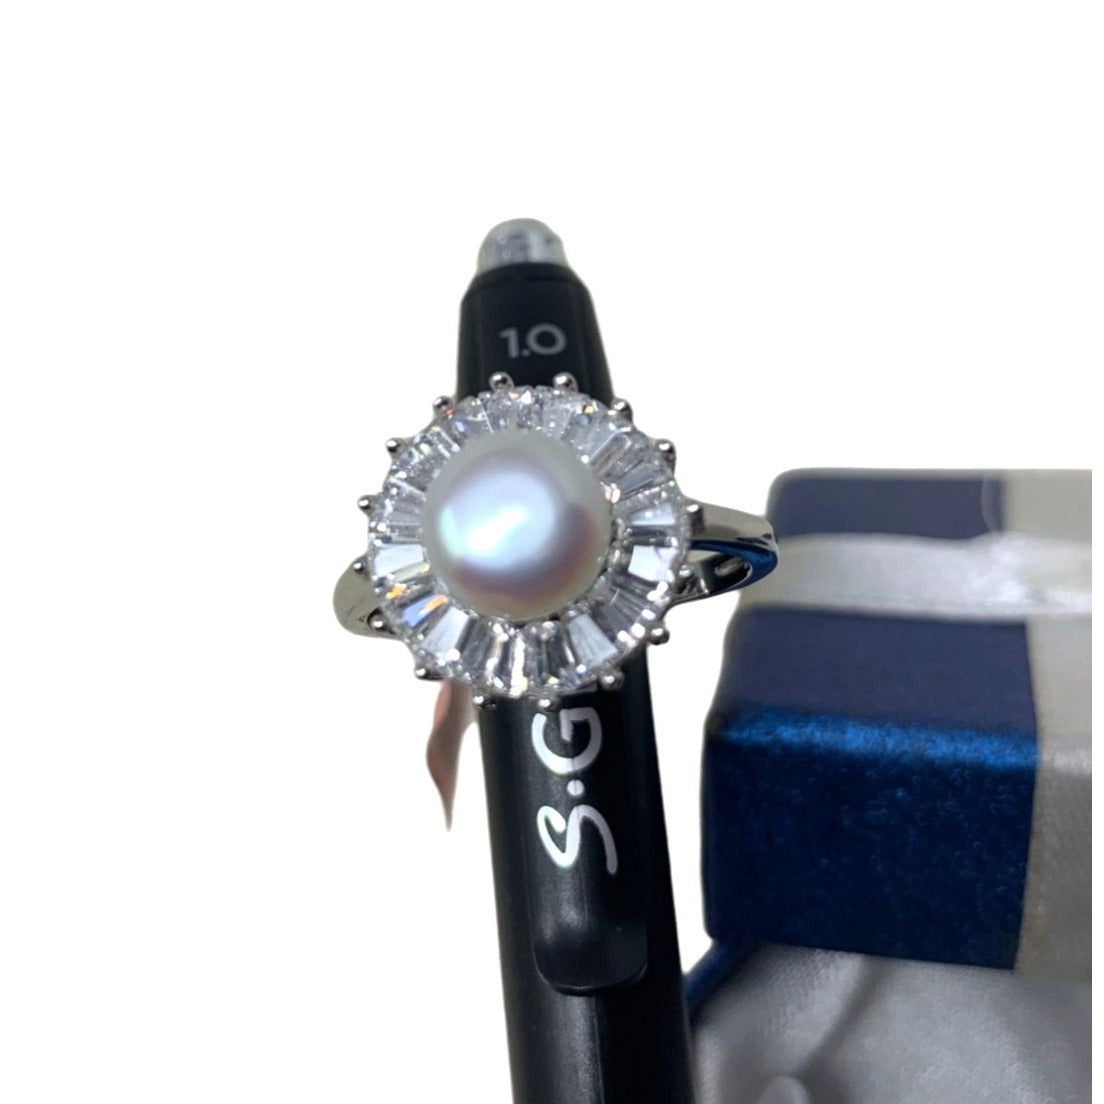 Sterling Ring - Large Pearl-like stone with Pretty Burst of gems surrounding Pretty!